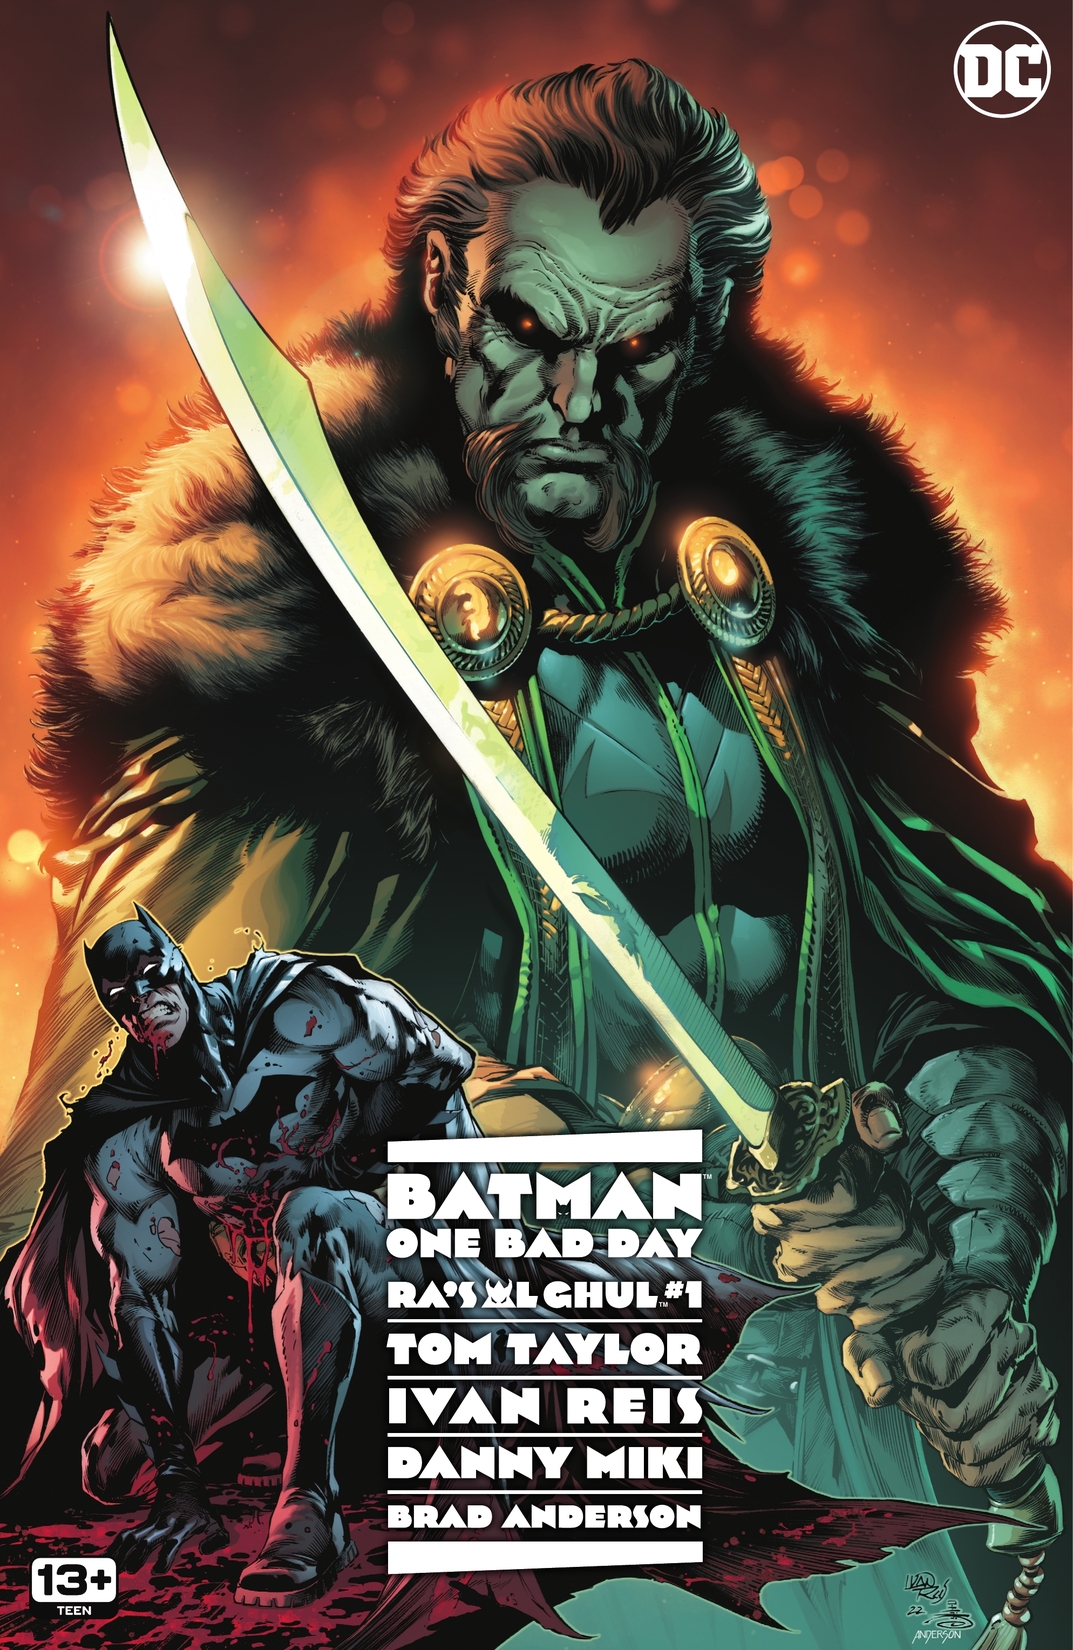 Batman - One Bad Day: Ra's Al Ghul #1 preview images